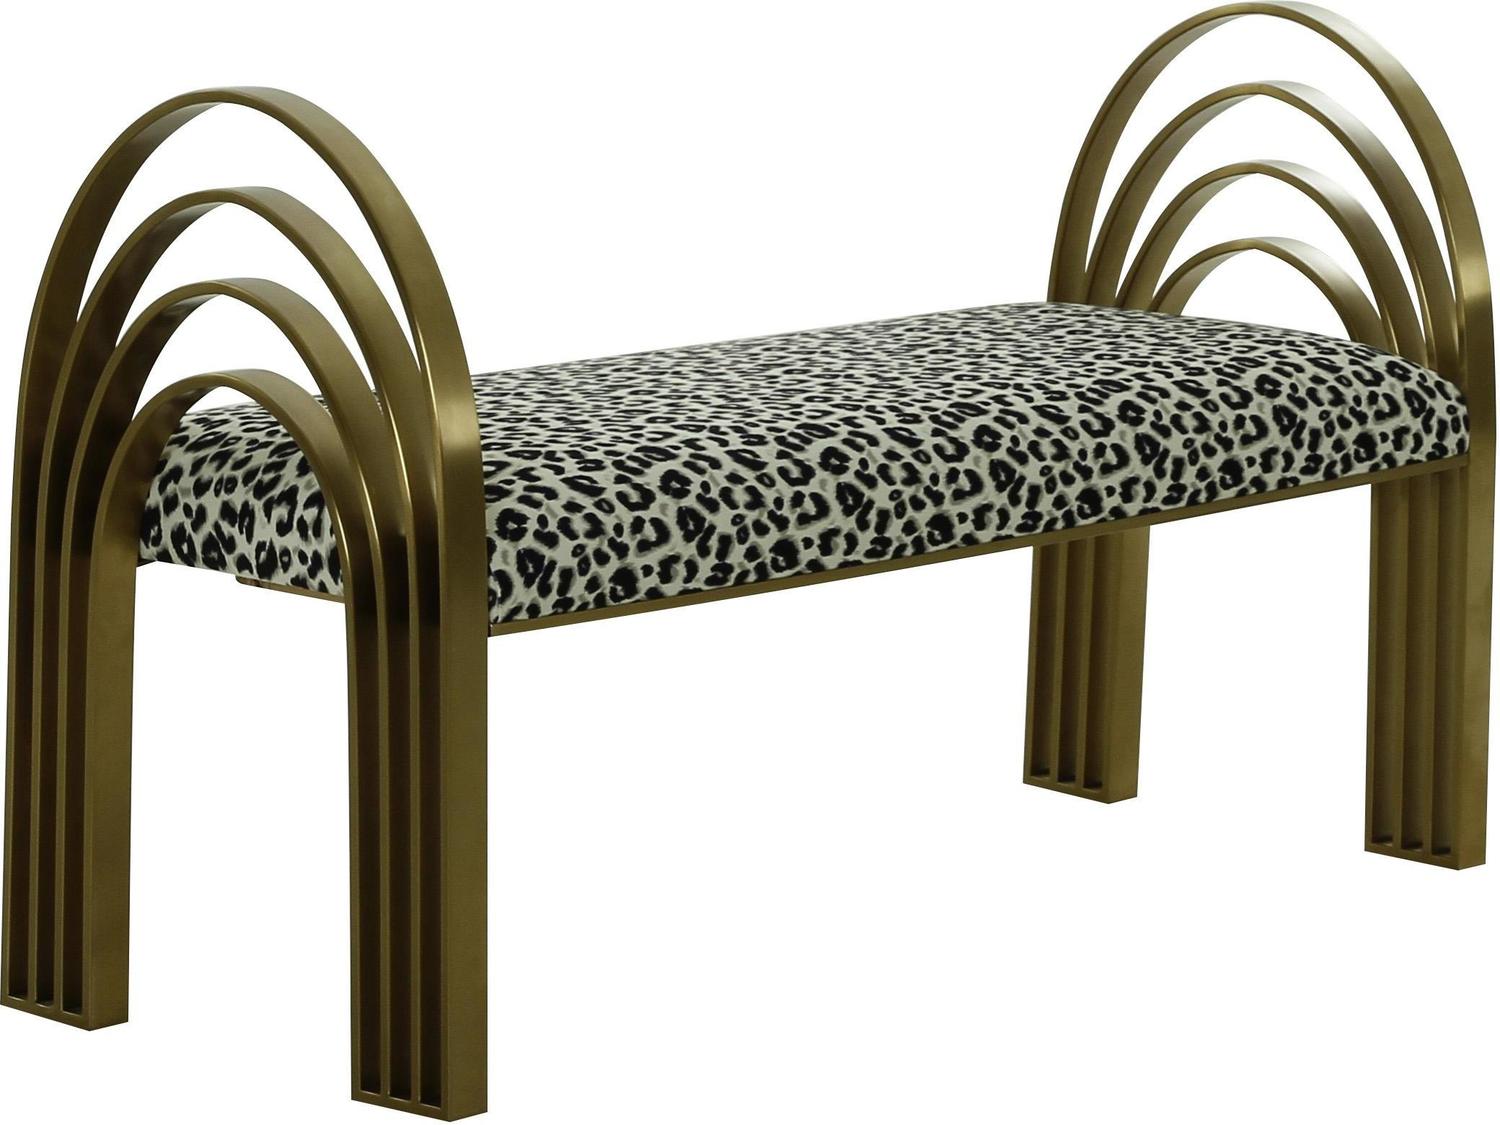 Tov Furniture Benches Ottomans and Benches Leopard